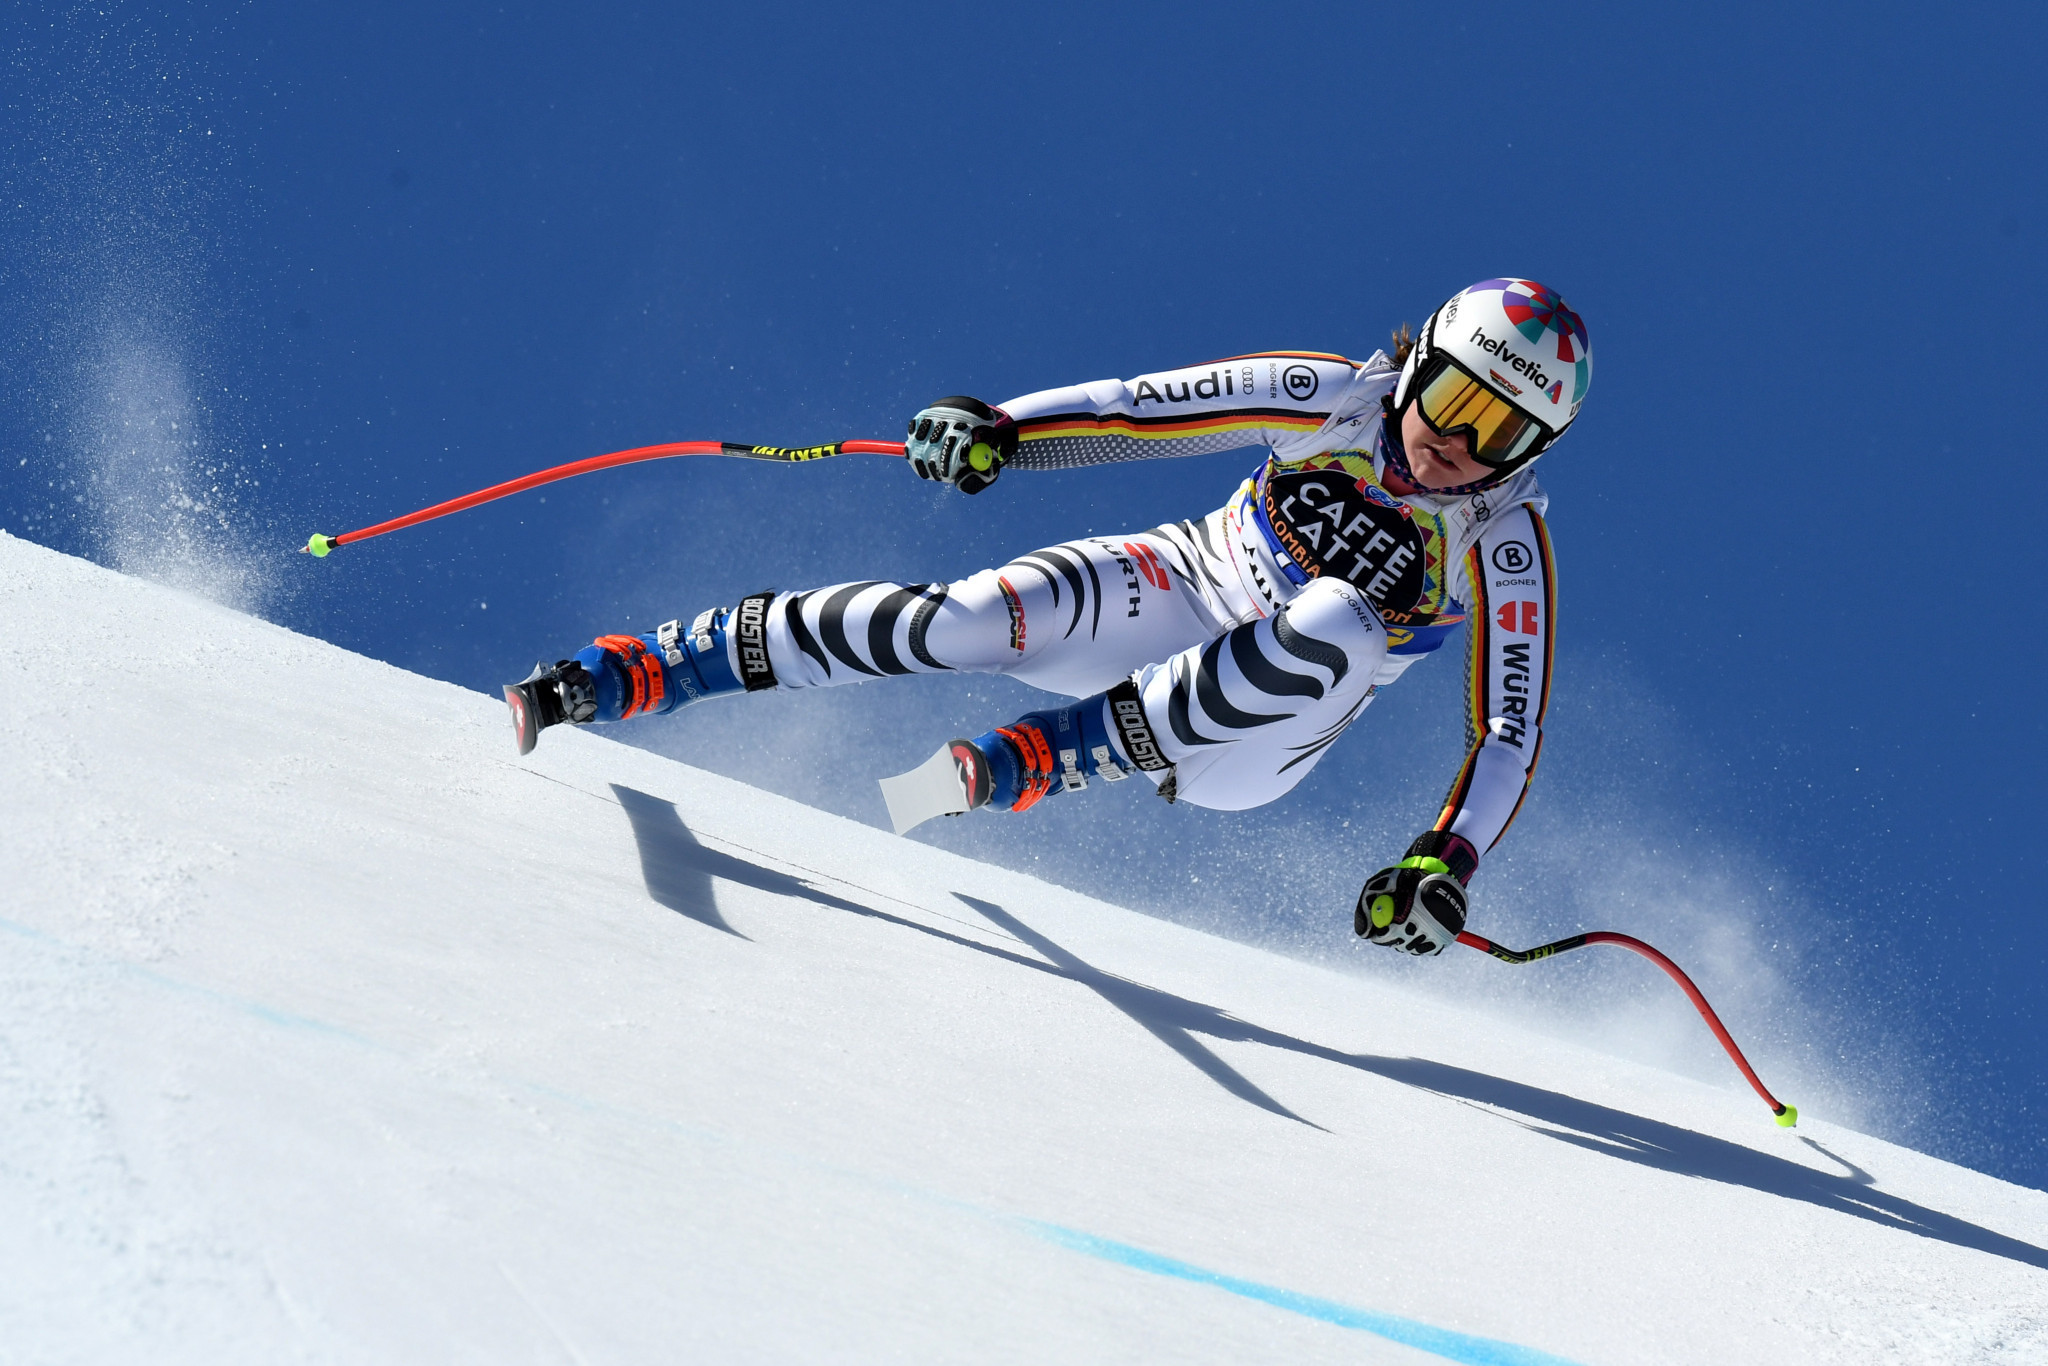 Discussions have taken place to host the Alpine World Ski Championships three times every four years ©Getty Images